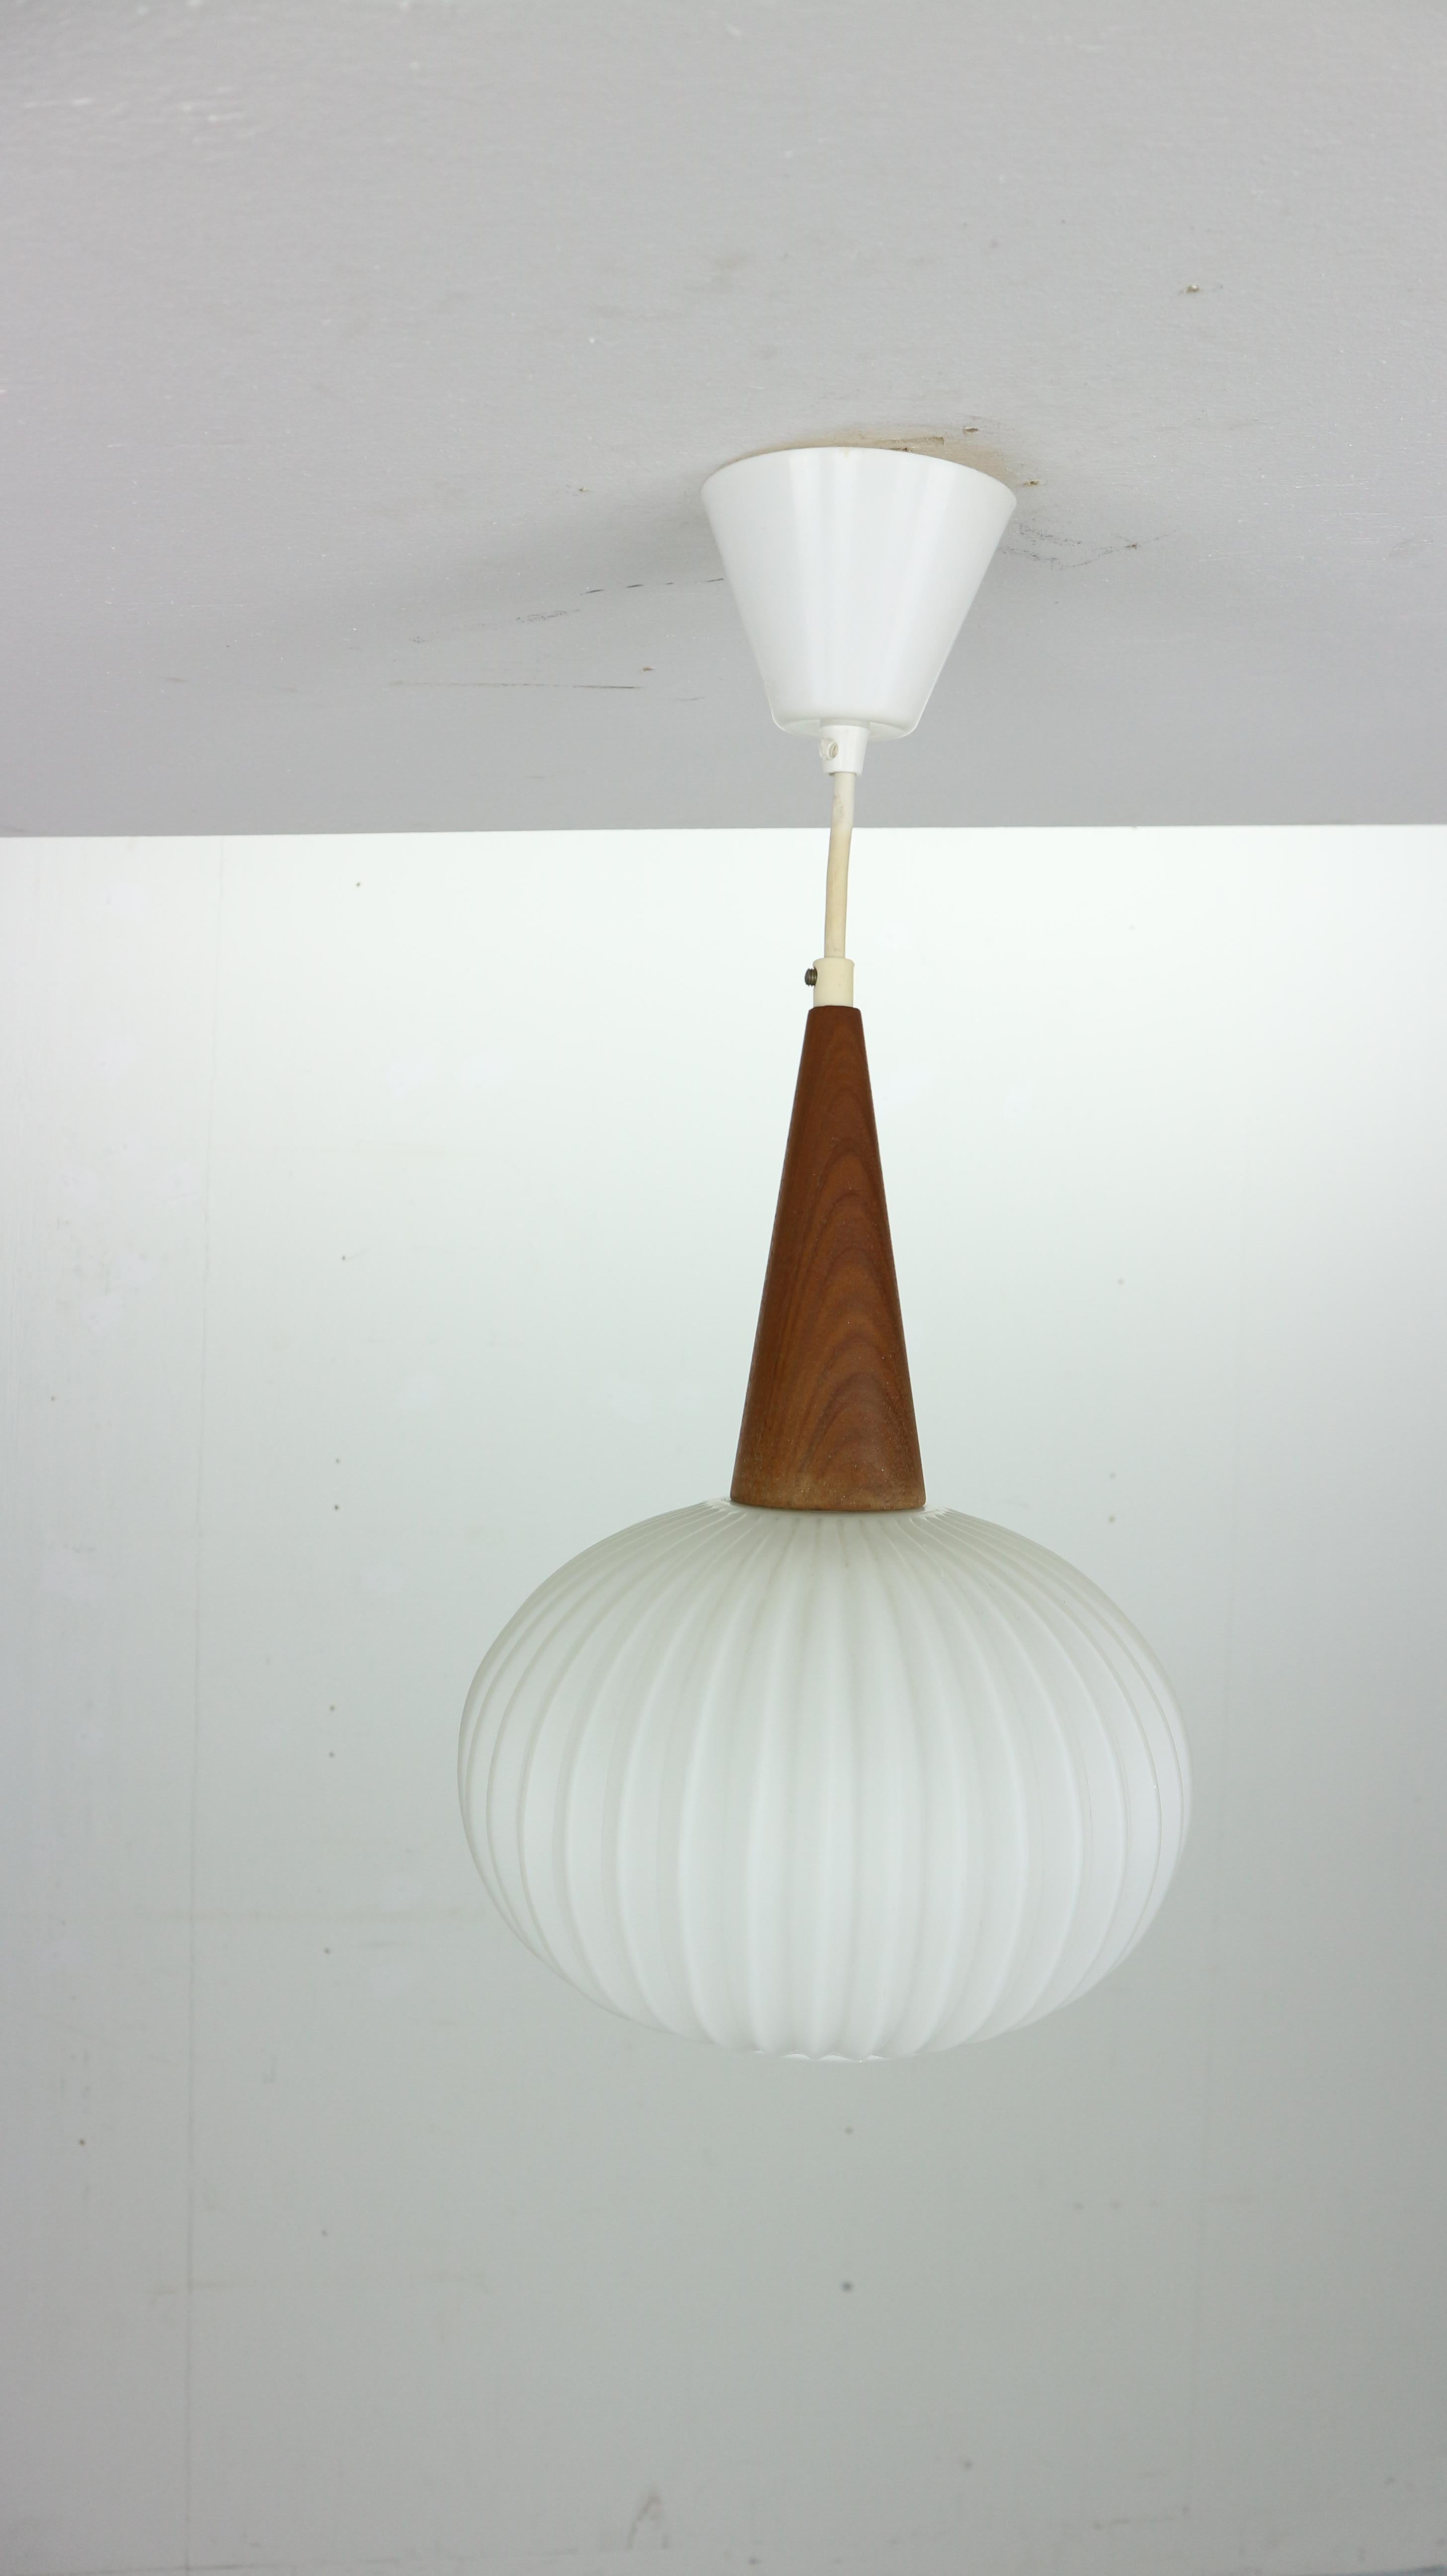 Vintage Mid-Century Modern design opal milk glass and teak pendant lamp designed by Louis Kalff and manufactured by Phillips in 1960s the Netherlands.
Elegant lamp provides warm and soft lightening.
 